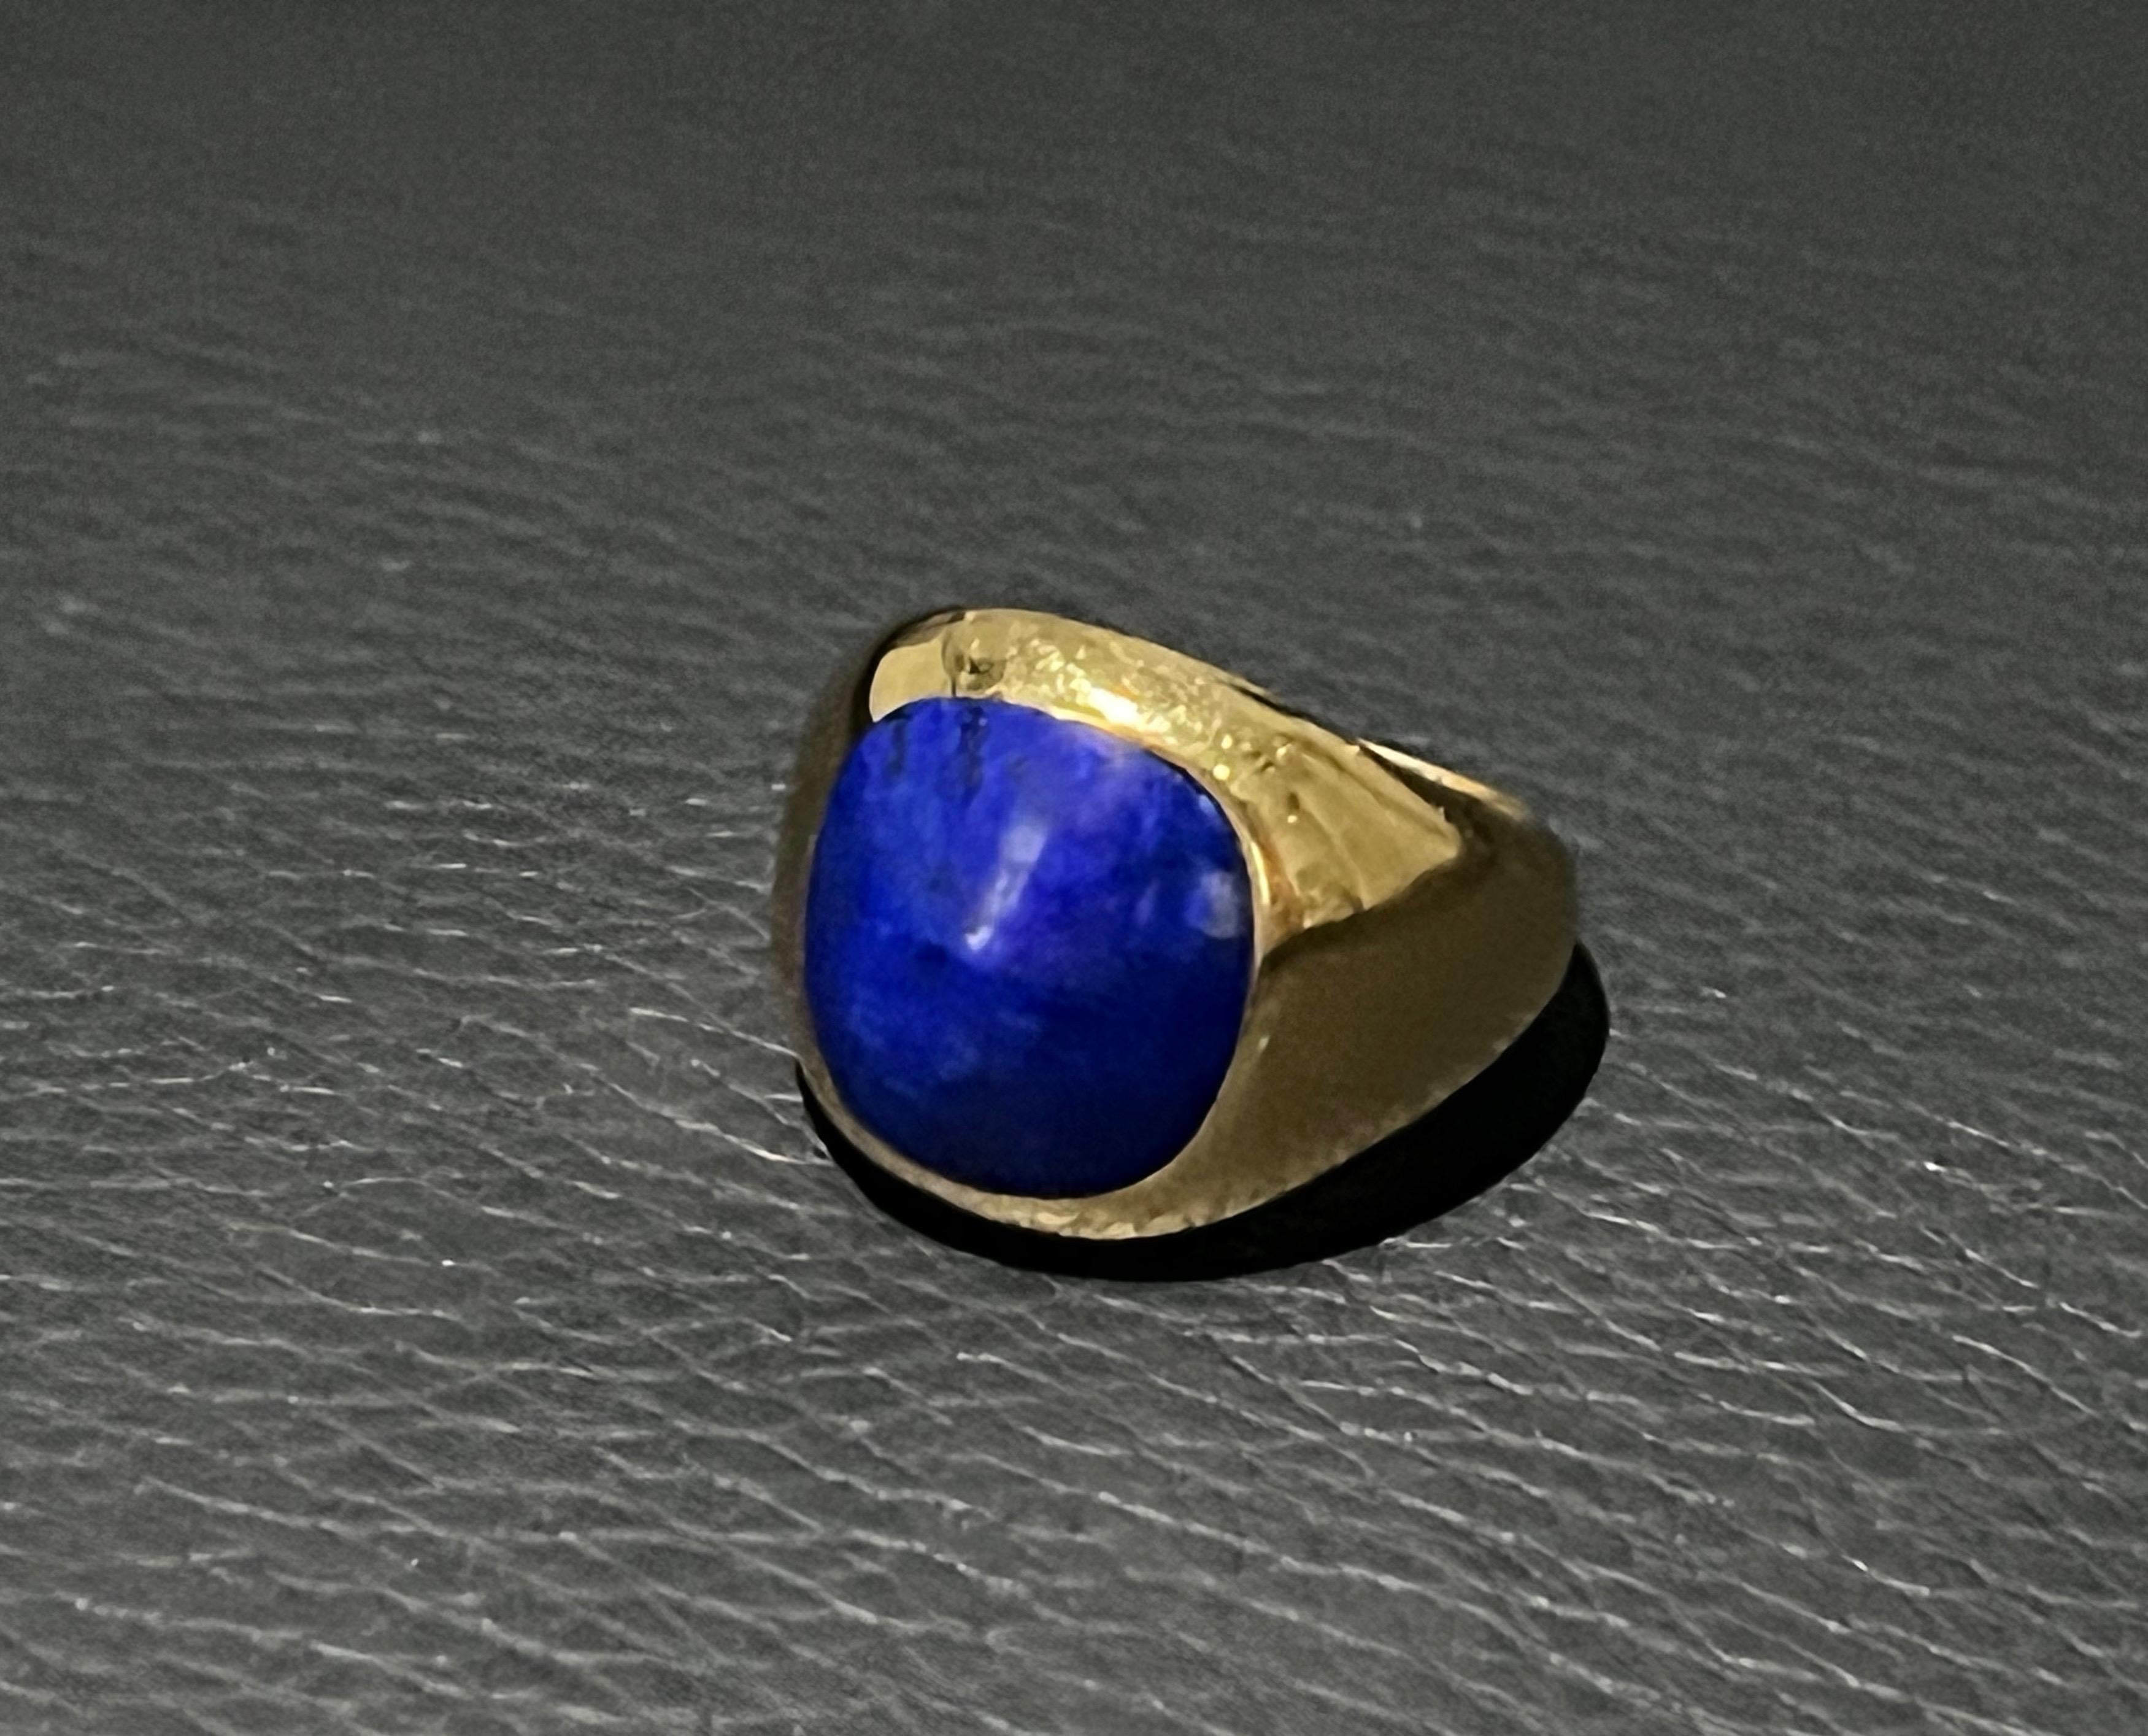 Women's A Cushion Shaped Lapis Lazuli Mounted In a 18 Carat Yellow Gold Signet Ring  For Sale